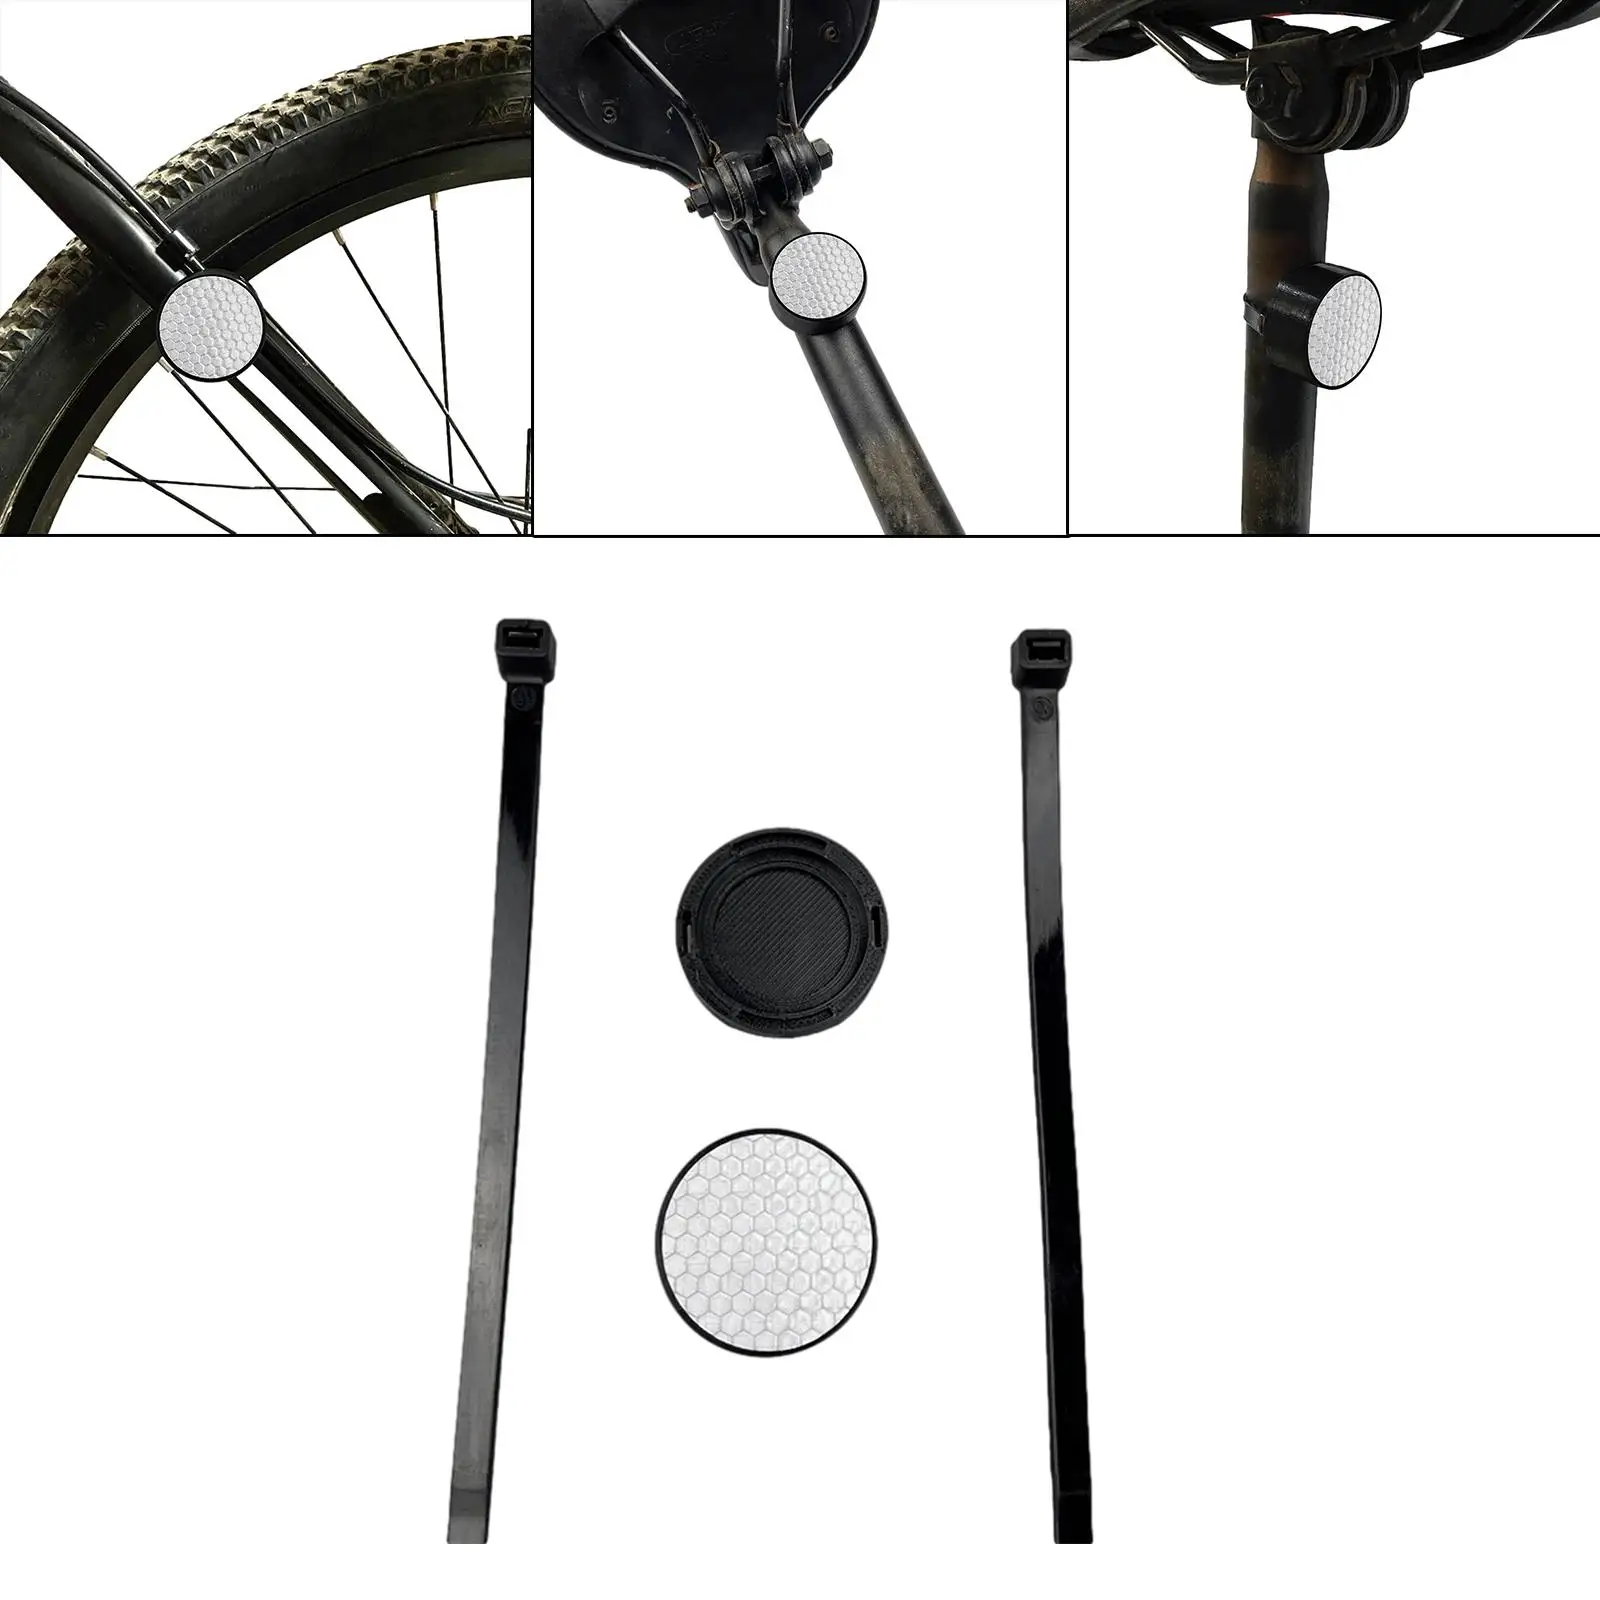 Bike Reflector Device Install Protective Case Location Hidden Bracket for  Holder Road Bicycle Cylindrical Structures